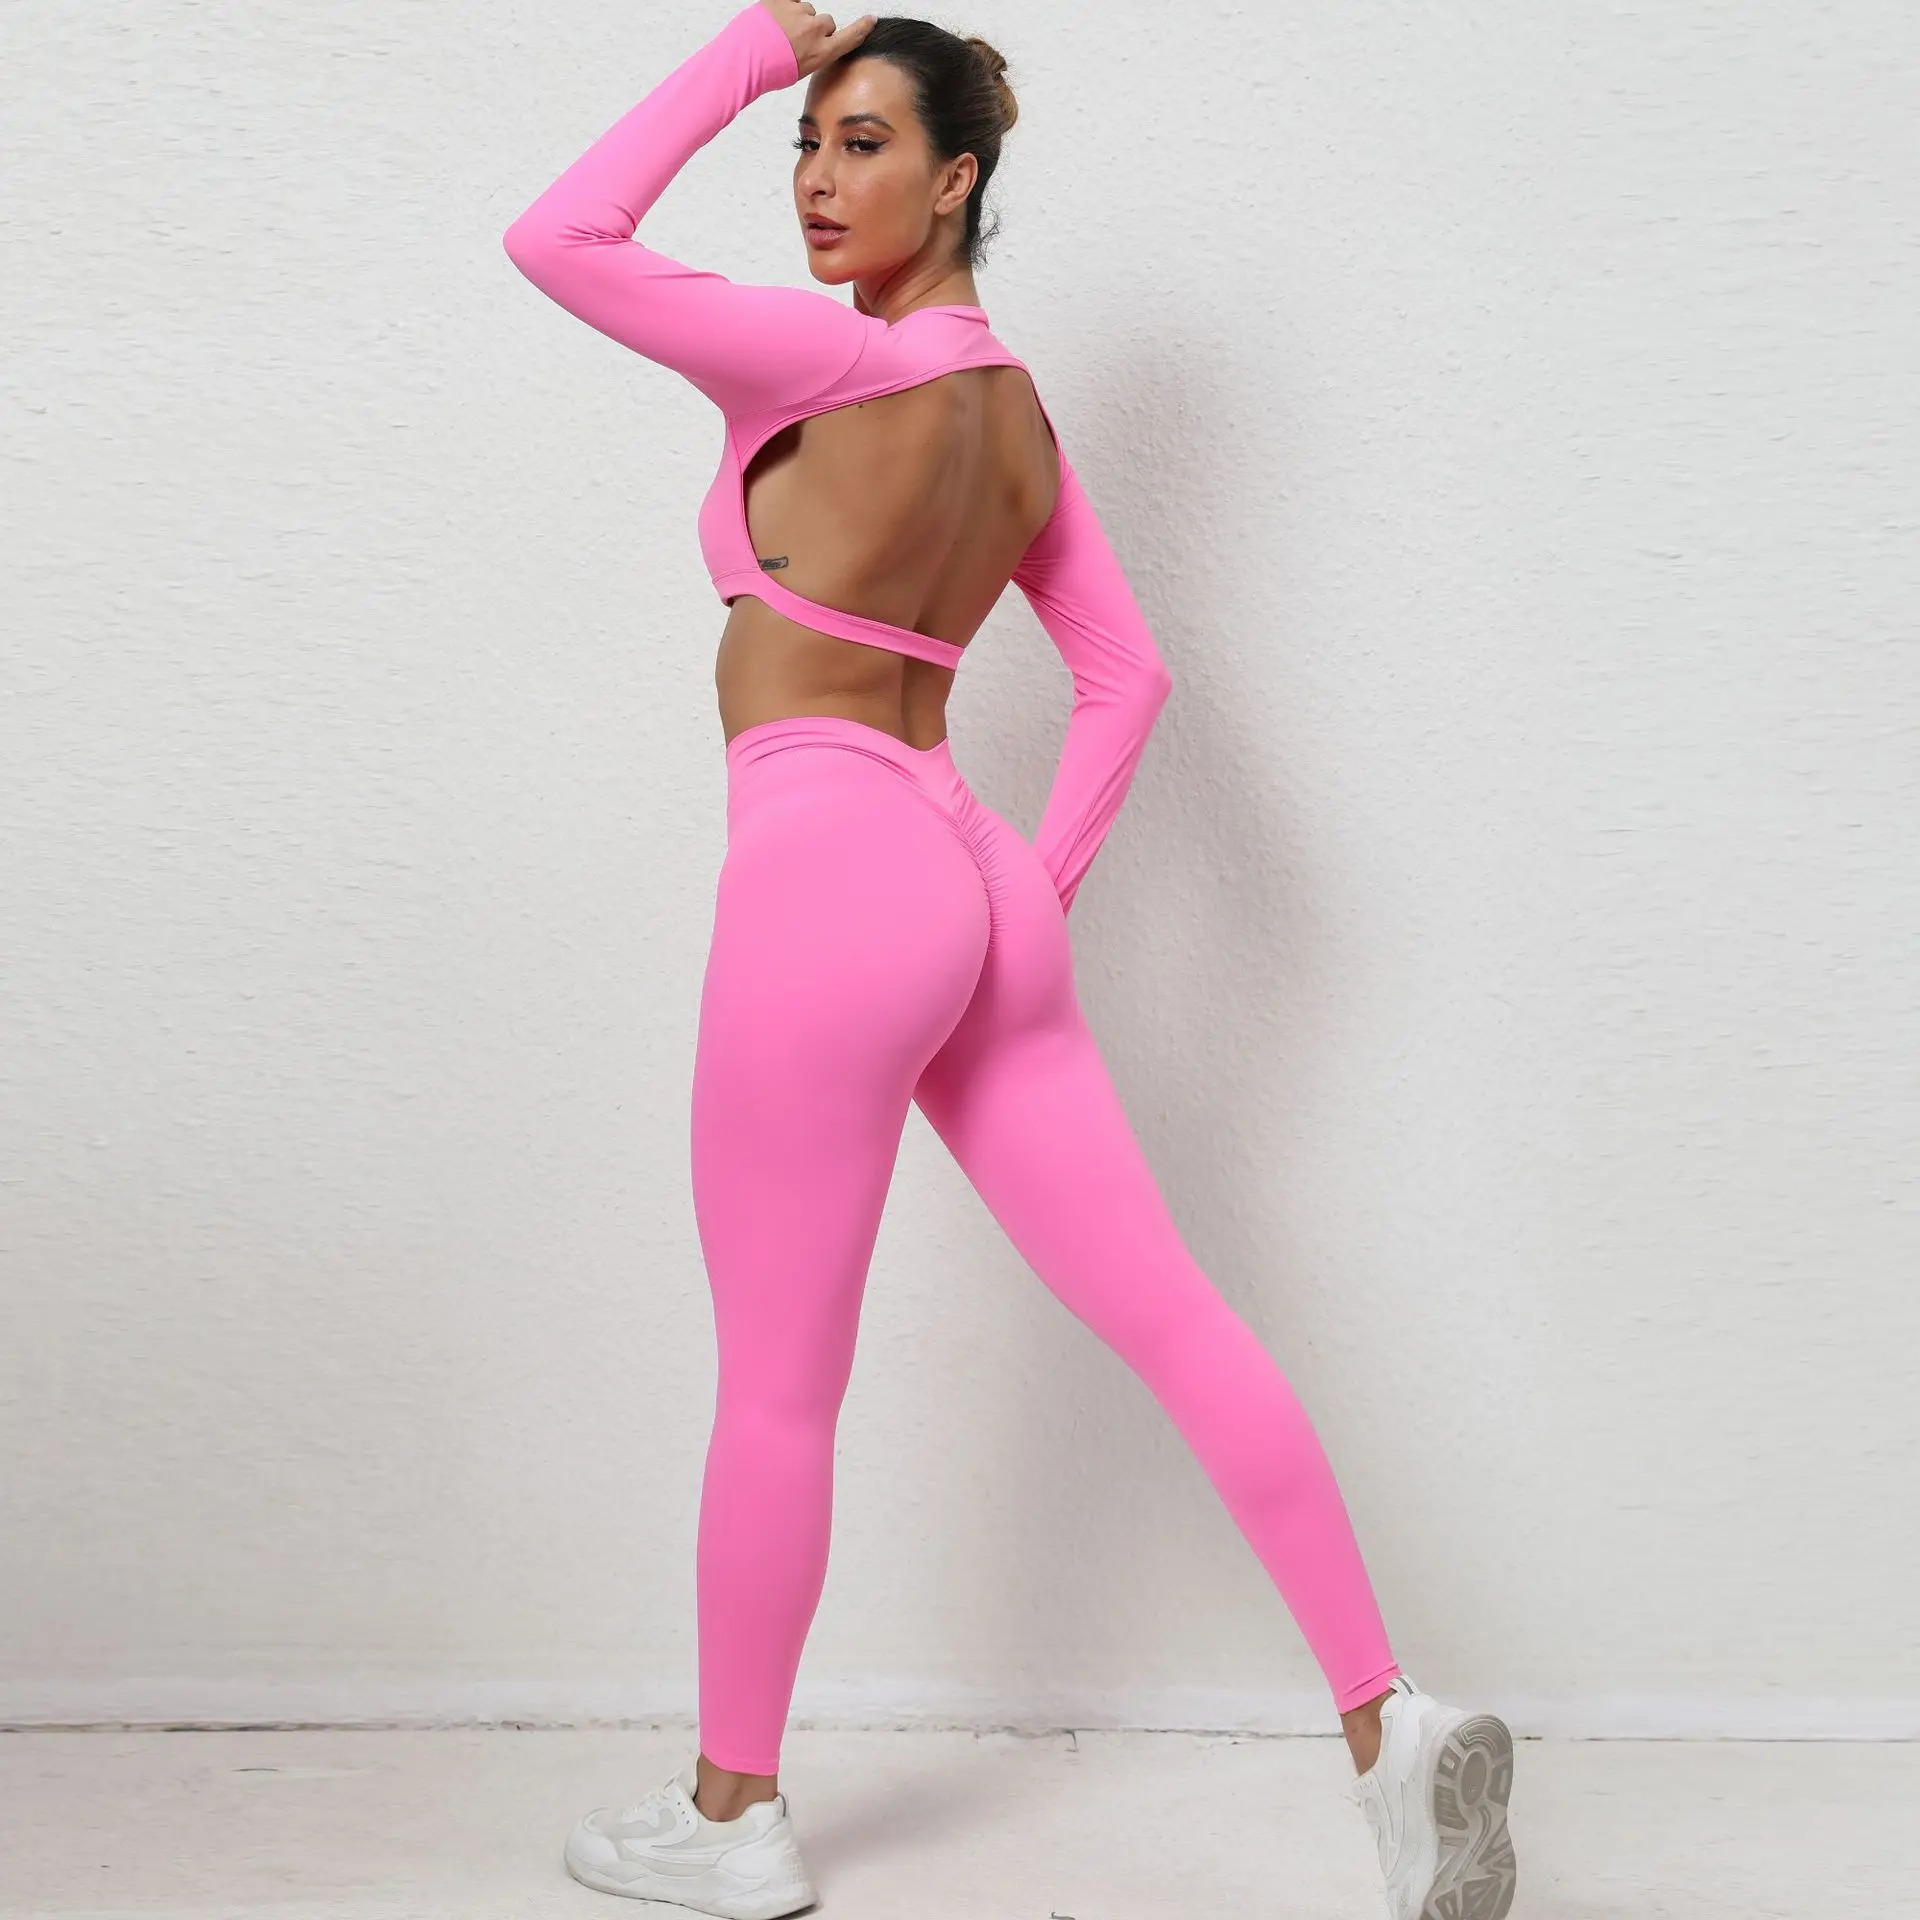 Spicy Girls Open Back Long Sleeve Top and Yoga Pants, Quick Dried Sports Set, Tight, Nude, Sexy, Fashion women s new high spring jacquard peach hip fitness high waist quick drying sports pants tight stretch yoga long sleeve set